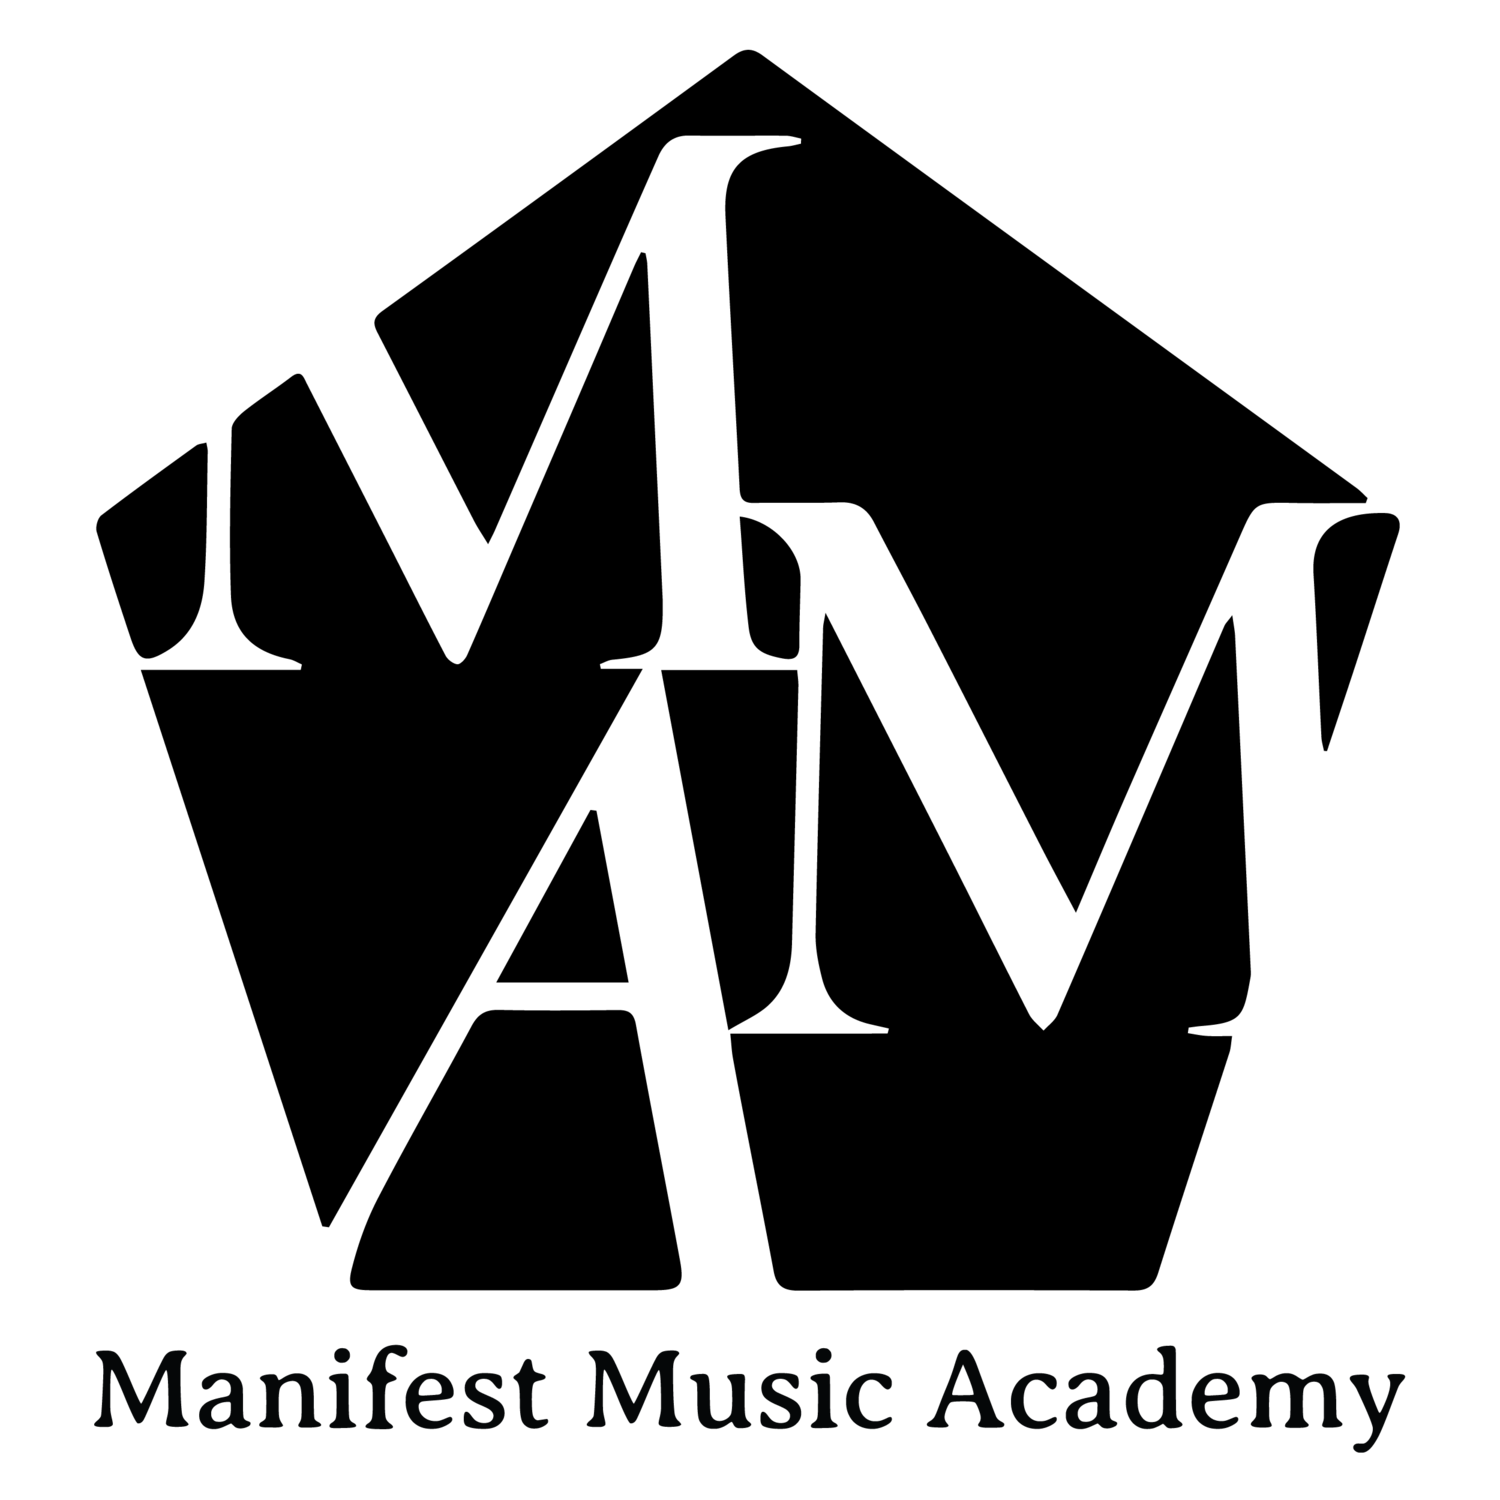 How to manifest with music